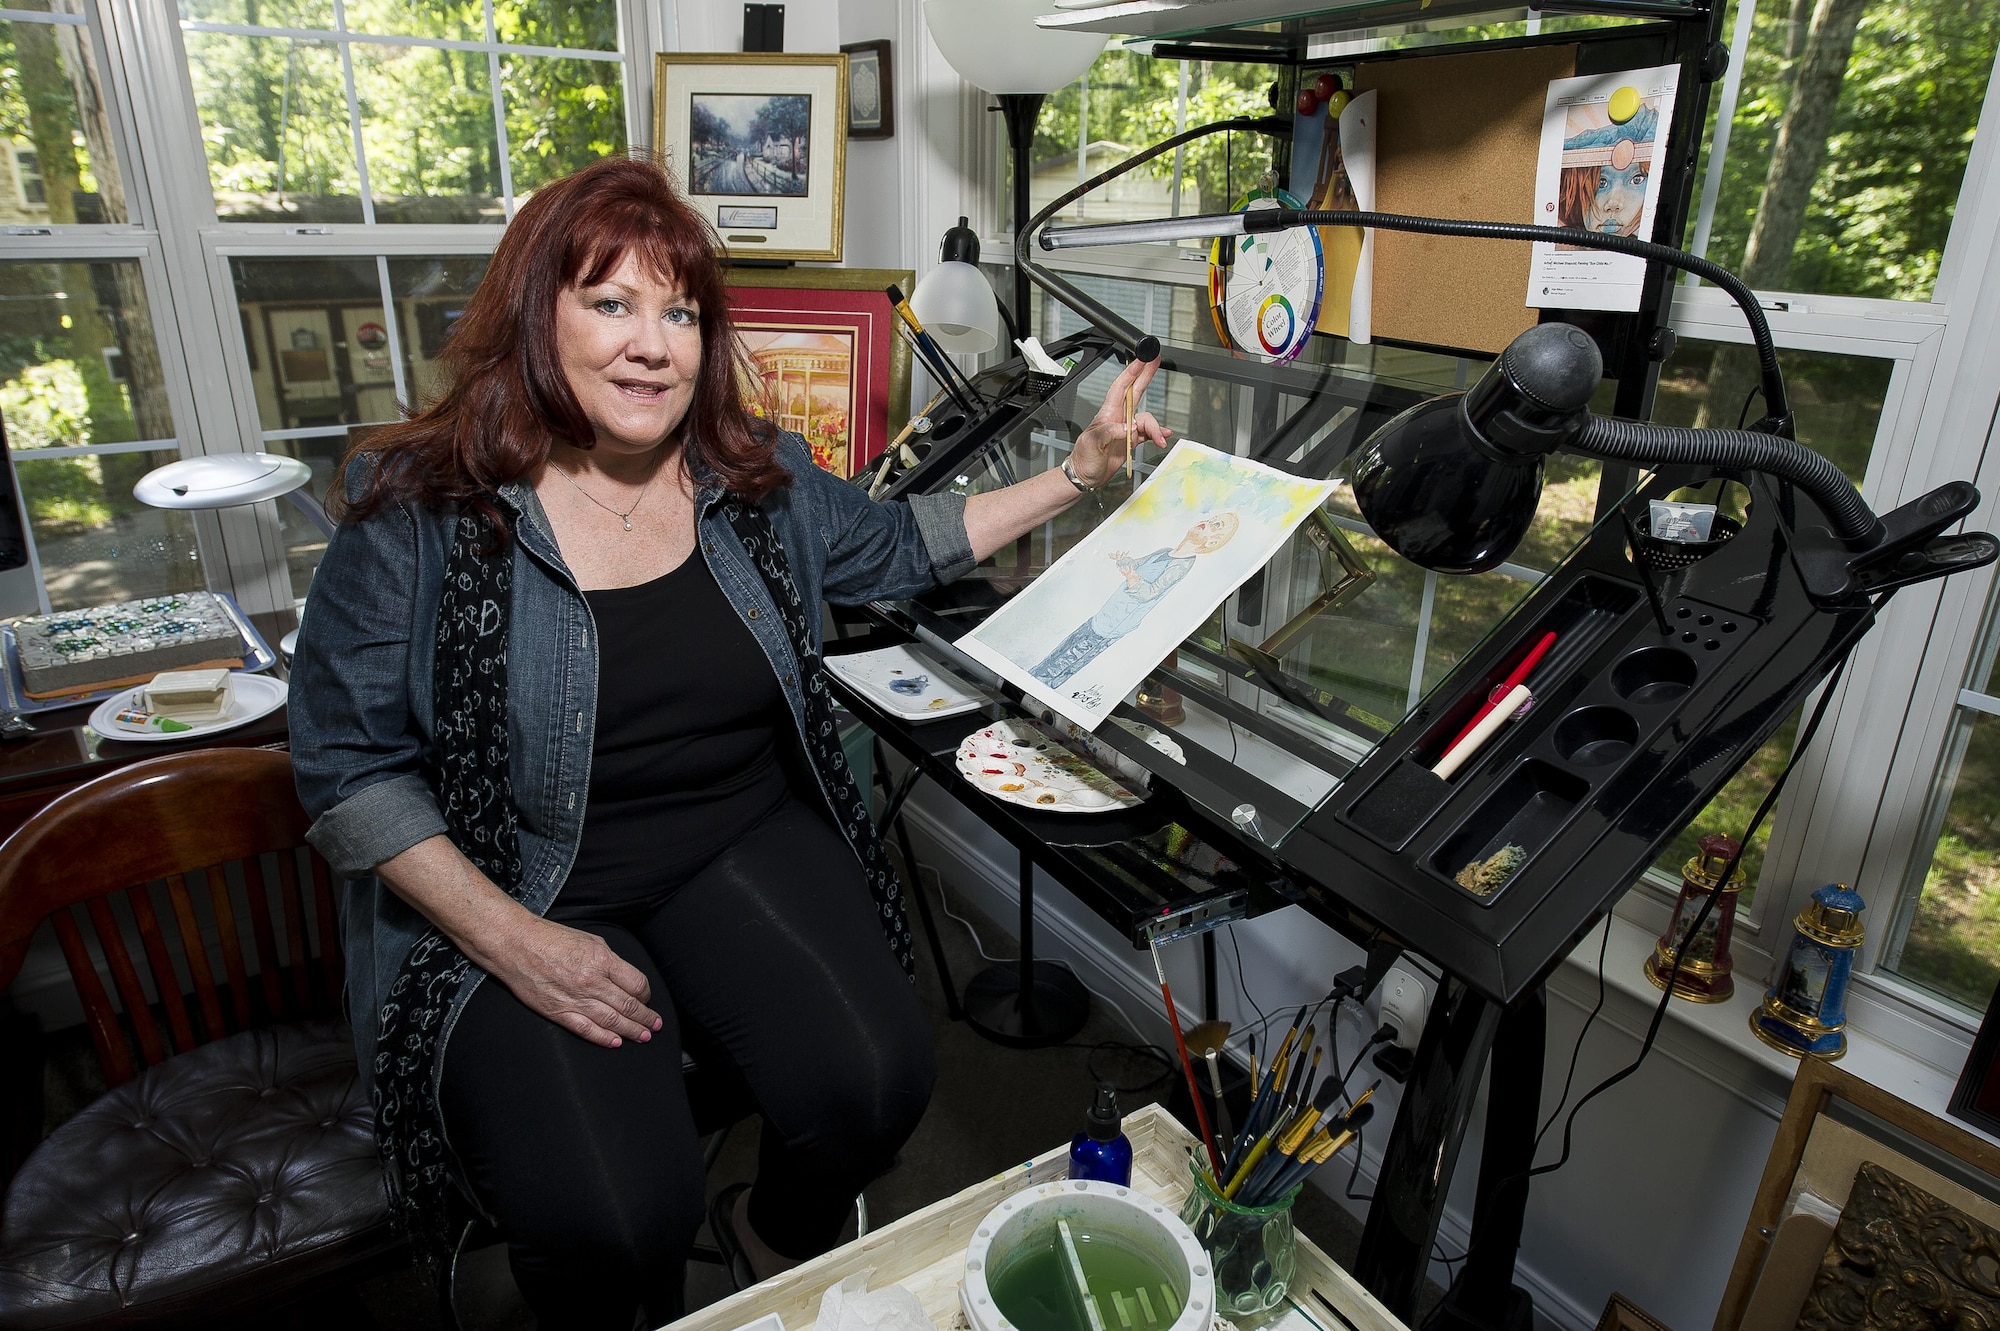 Selena Zuhoski sits inside her art studio at her home in Maryland on June 10, 2016. Zuhoski was in a recreational building when terrorists exploded a truck in front of Bldg. 131 of the Khobar Towers complex in Dharan, Saudi Arabia, on June 25, 1996. Zuhoski and a group of people were among the first to help victims following the explosion, which killed 19 Airmen and injured more than 350 people. Art has been therapeutic for Zuhoski in dealing with her post-traumatic stress disorder from the attack. (U.S. Air Force photo/Staff Sgt. Christopher Gross) 